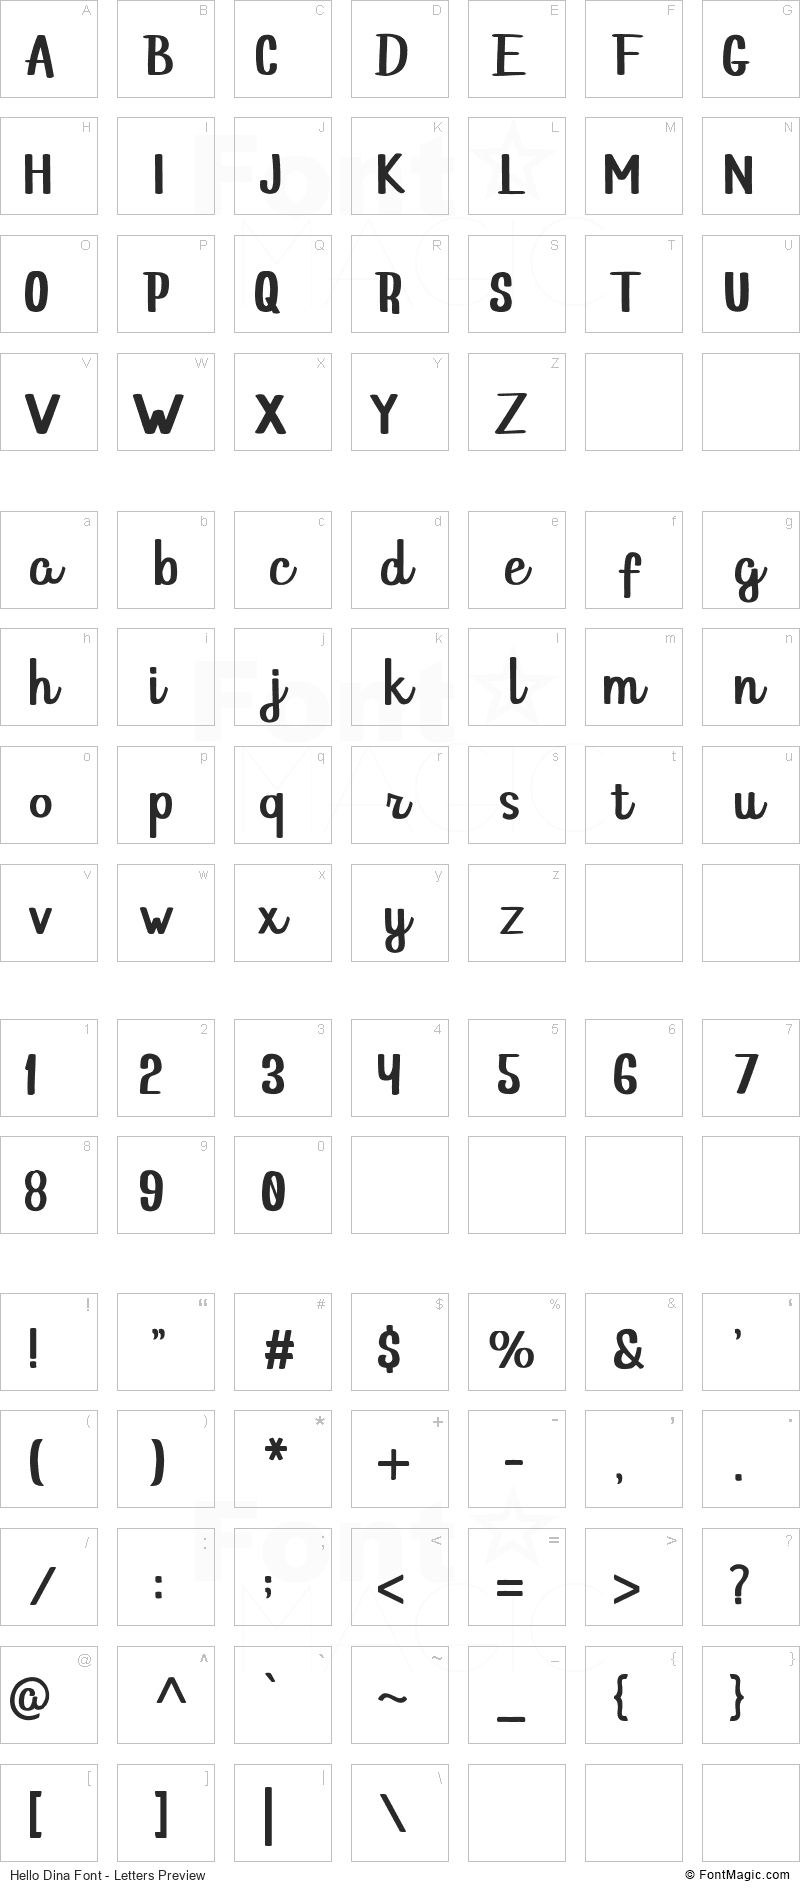 Hello Dina Font - All Latters Preview Chart